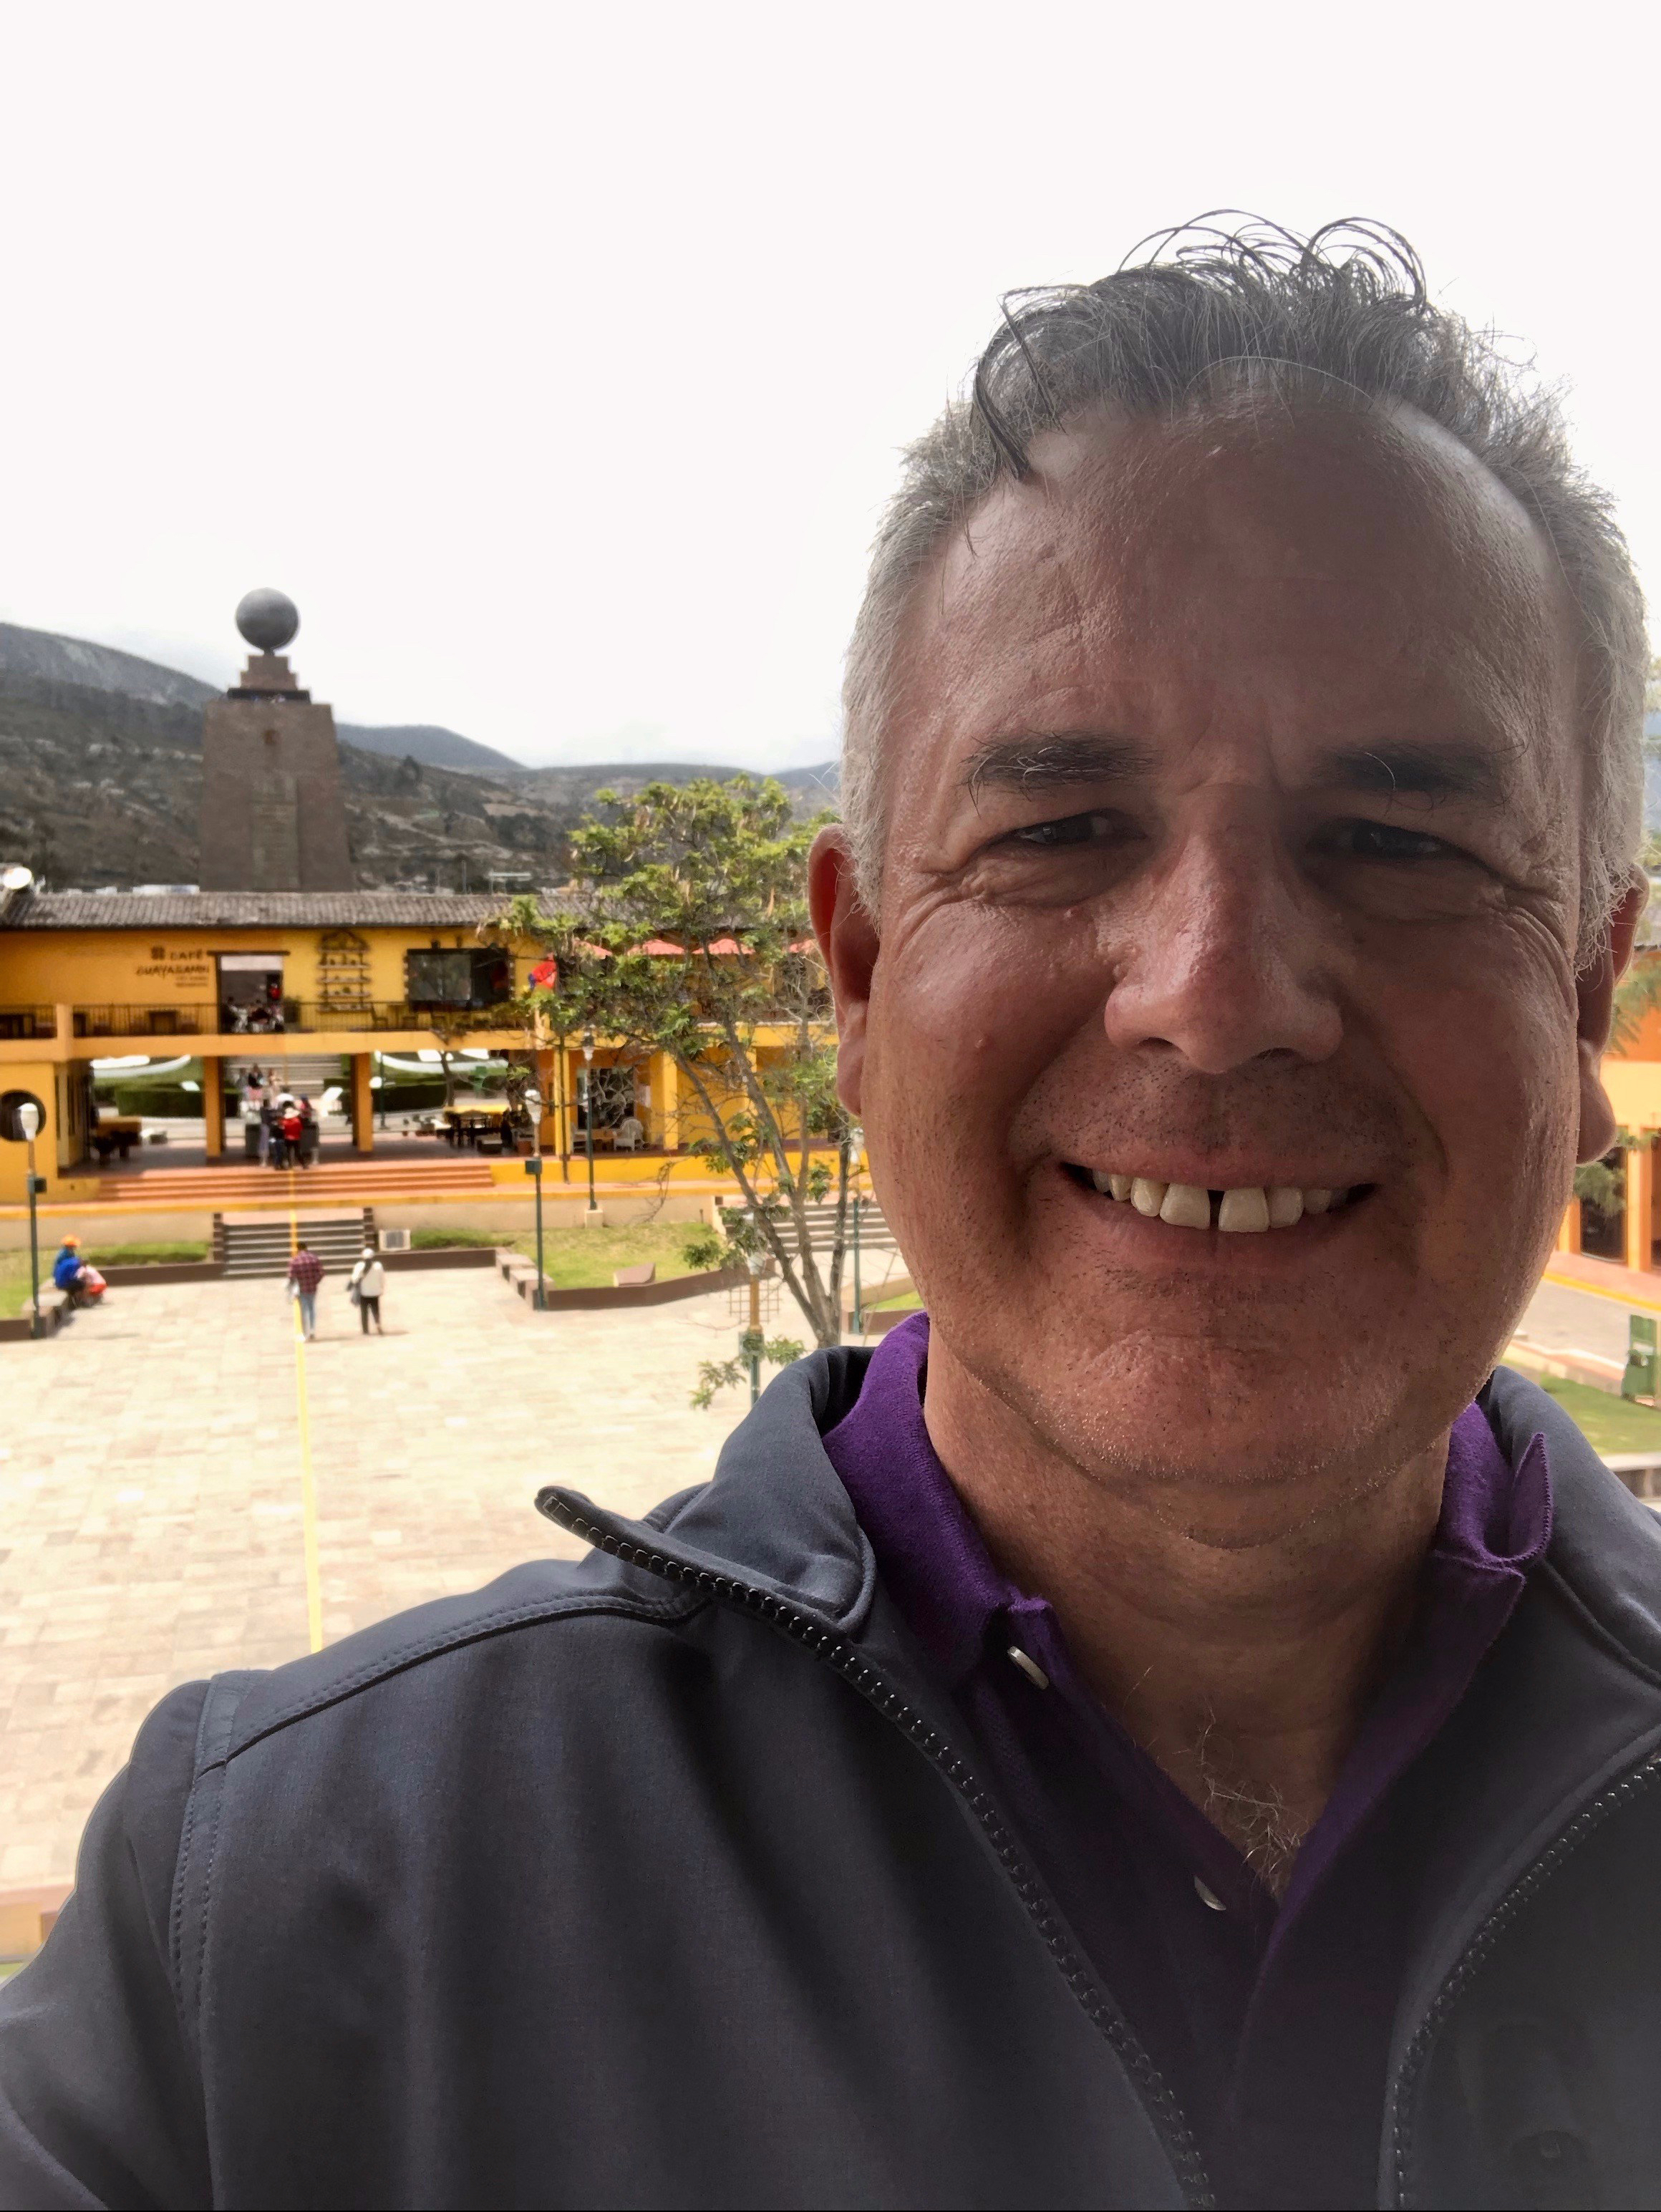 Dave in Quito - The Middle of the World